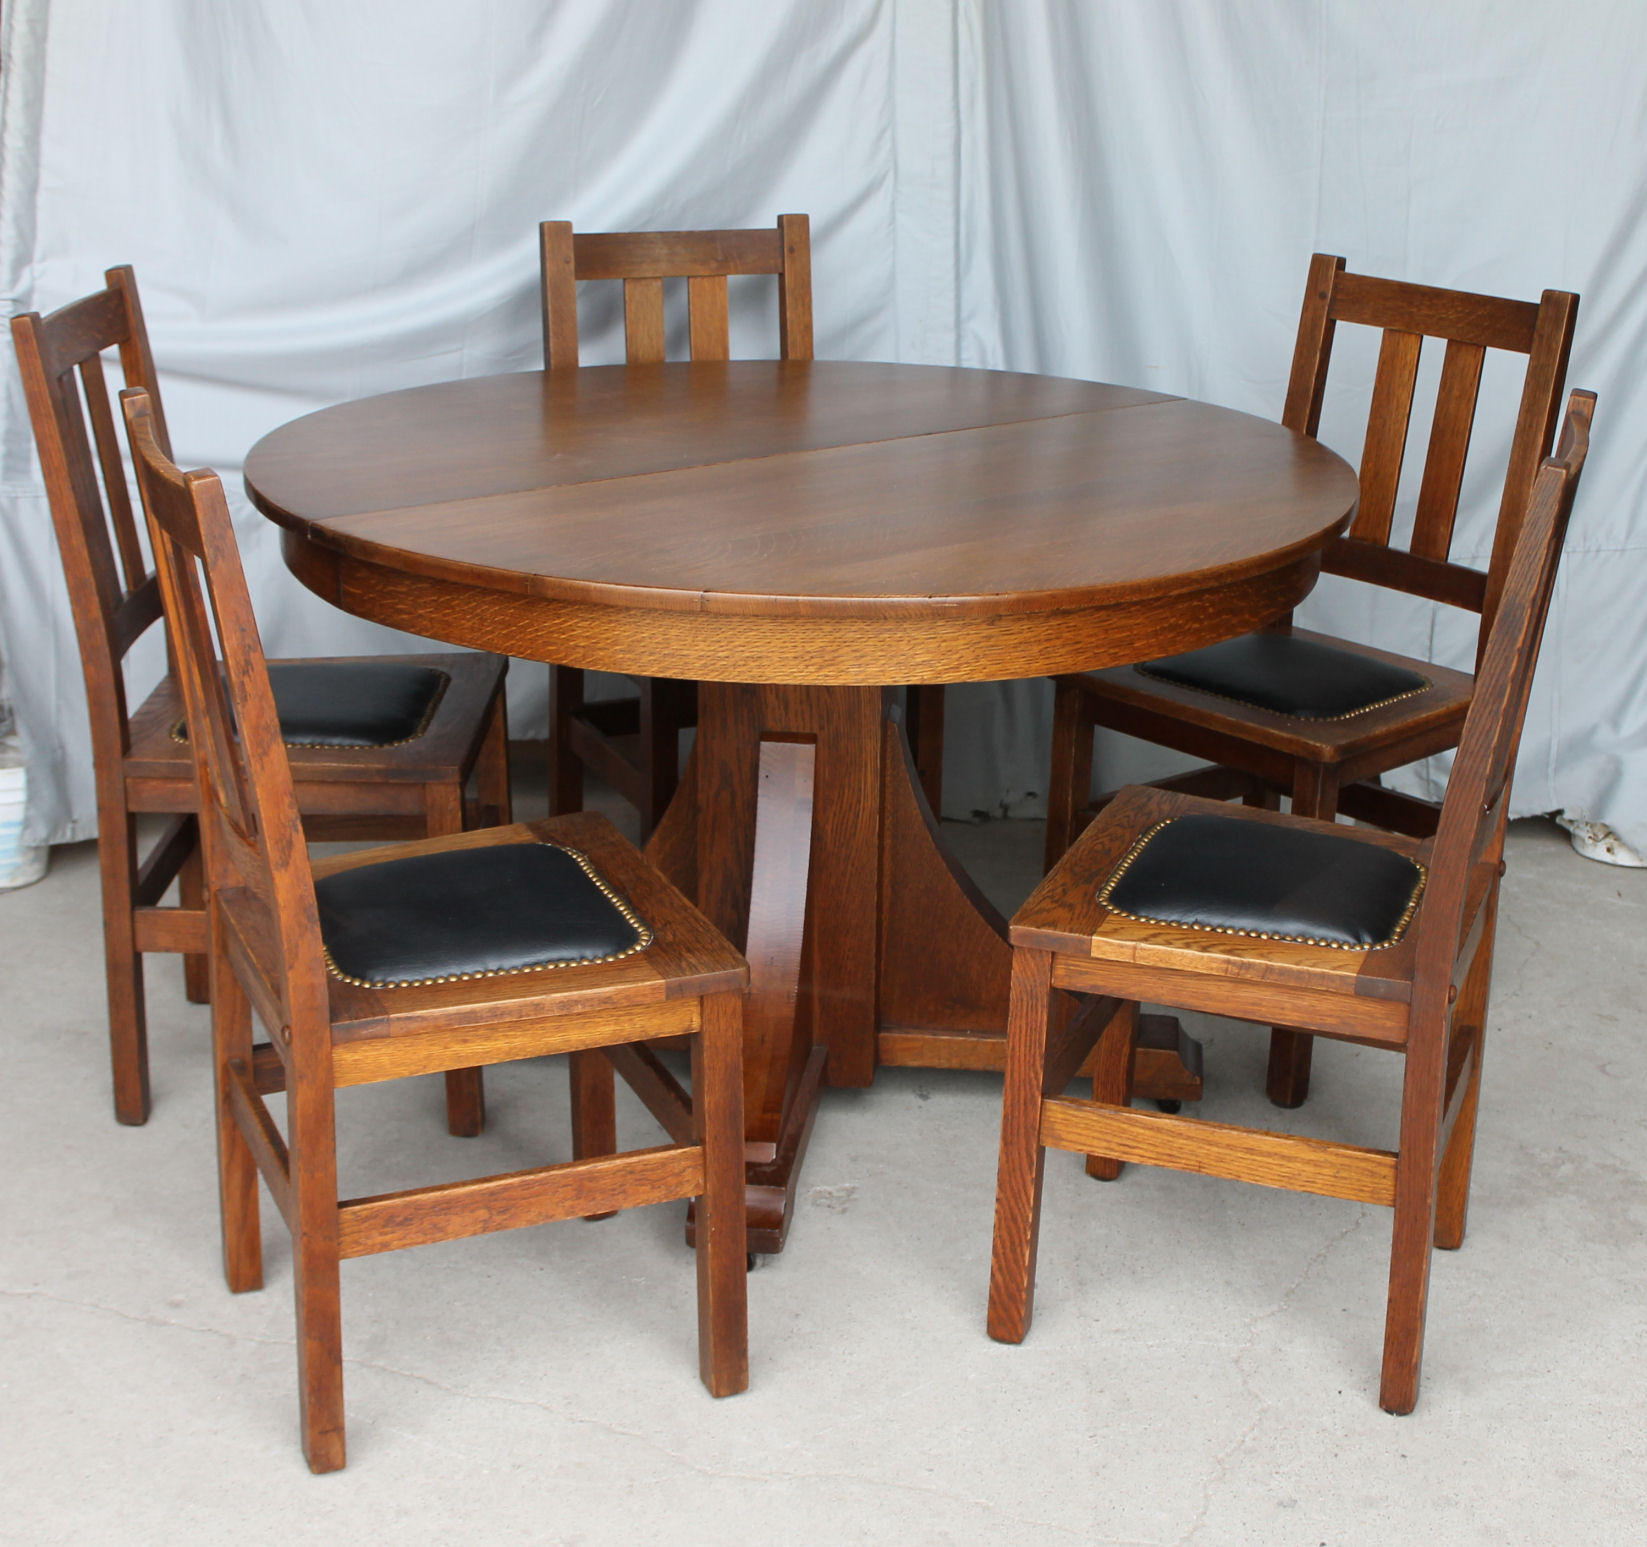 Mission Oak Antique Dining Set, Stickley Dining Room Table And Chairs Set